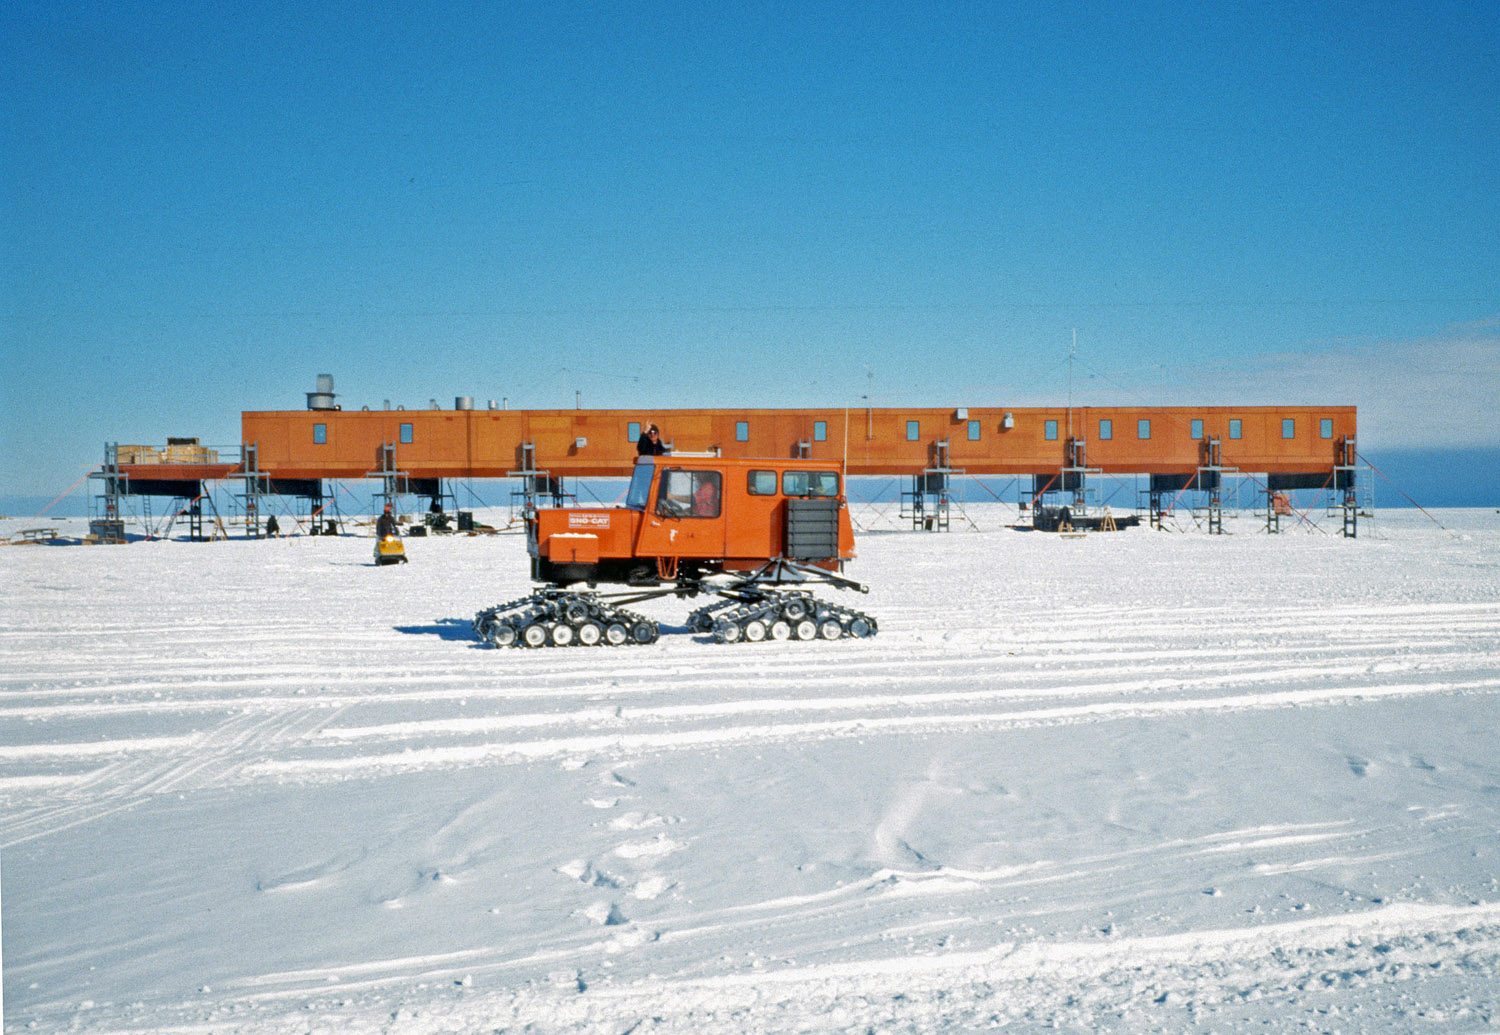 Sno-Cat and Station